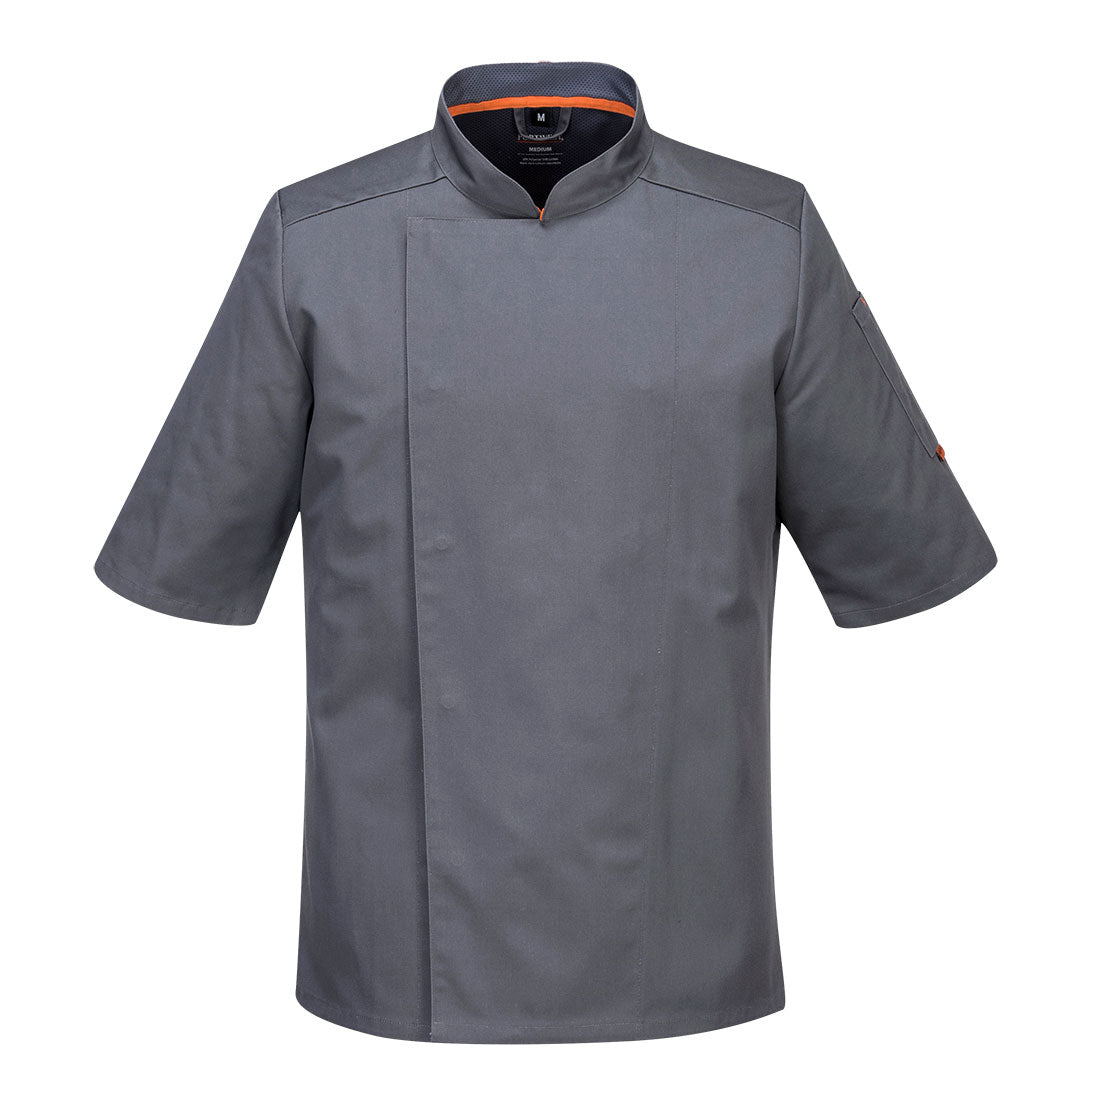 PORTWEST MESHAIR PRO CHEFS FOOD KITCHEN CATERING INDUSTRY UNISEX JACKET C738 - Hamtons Direct